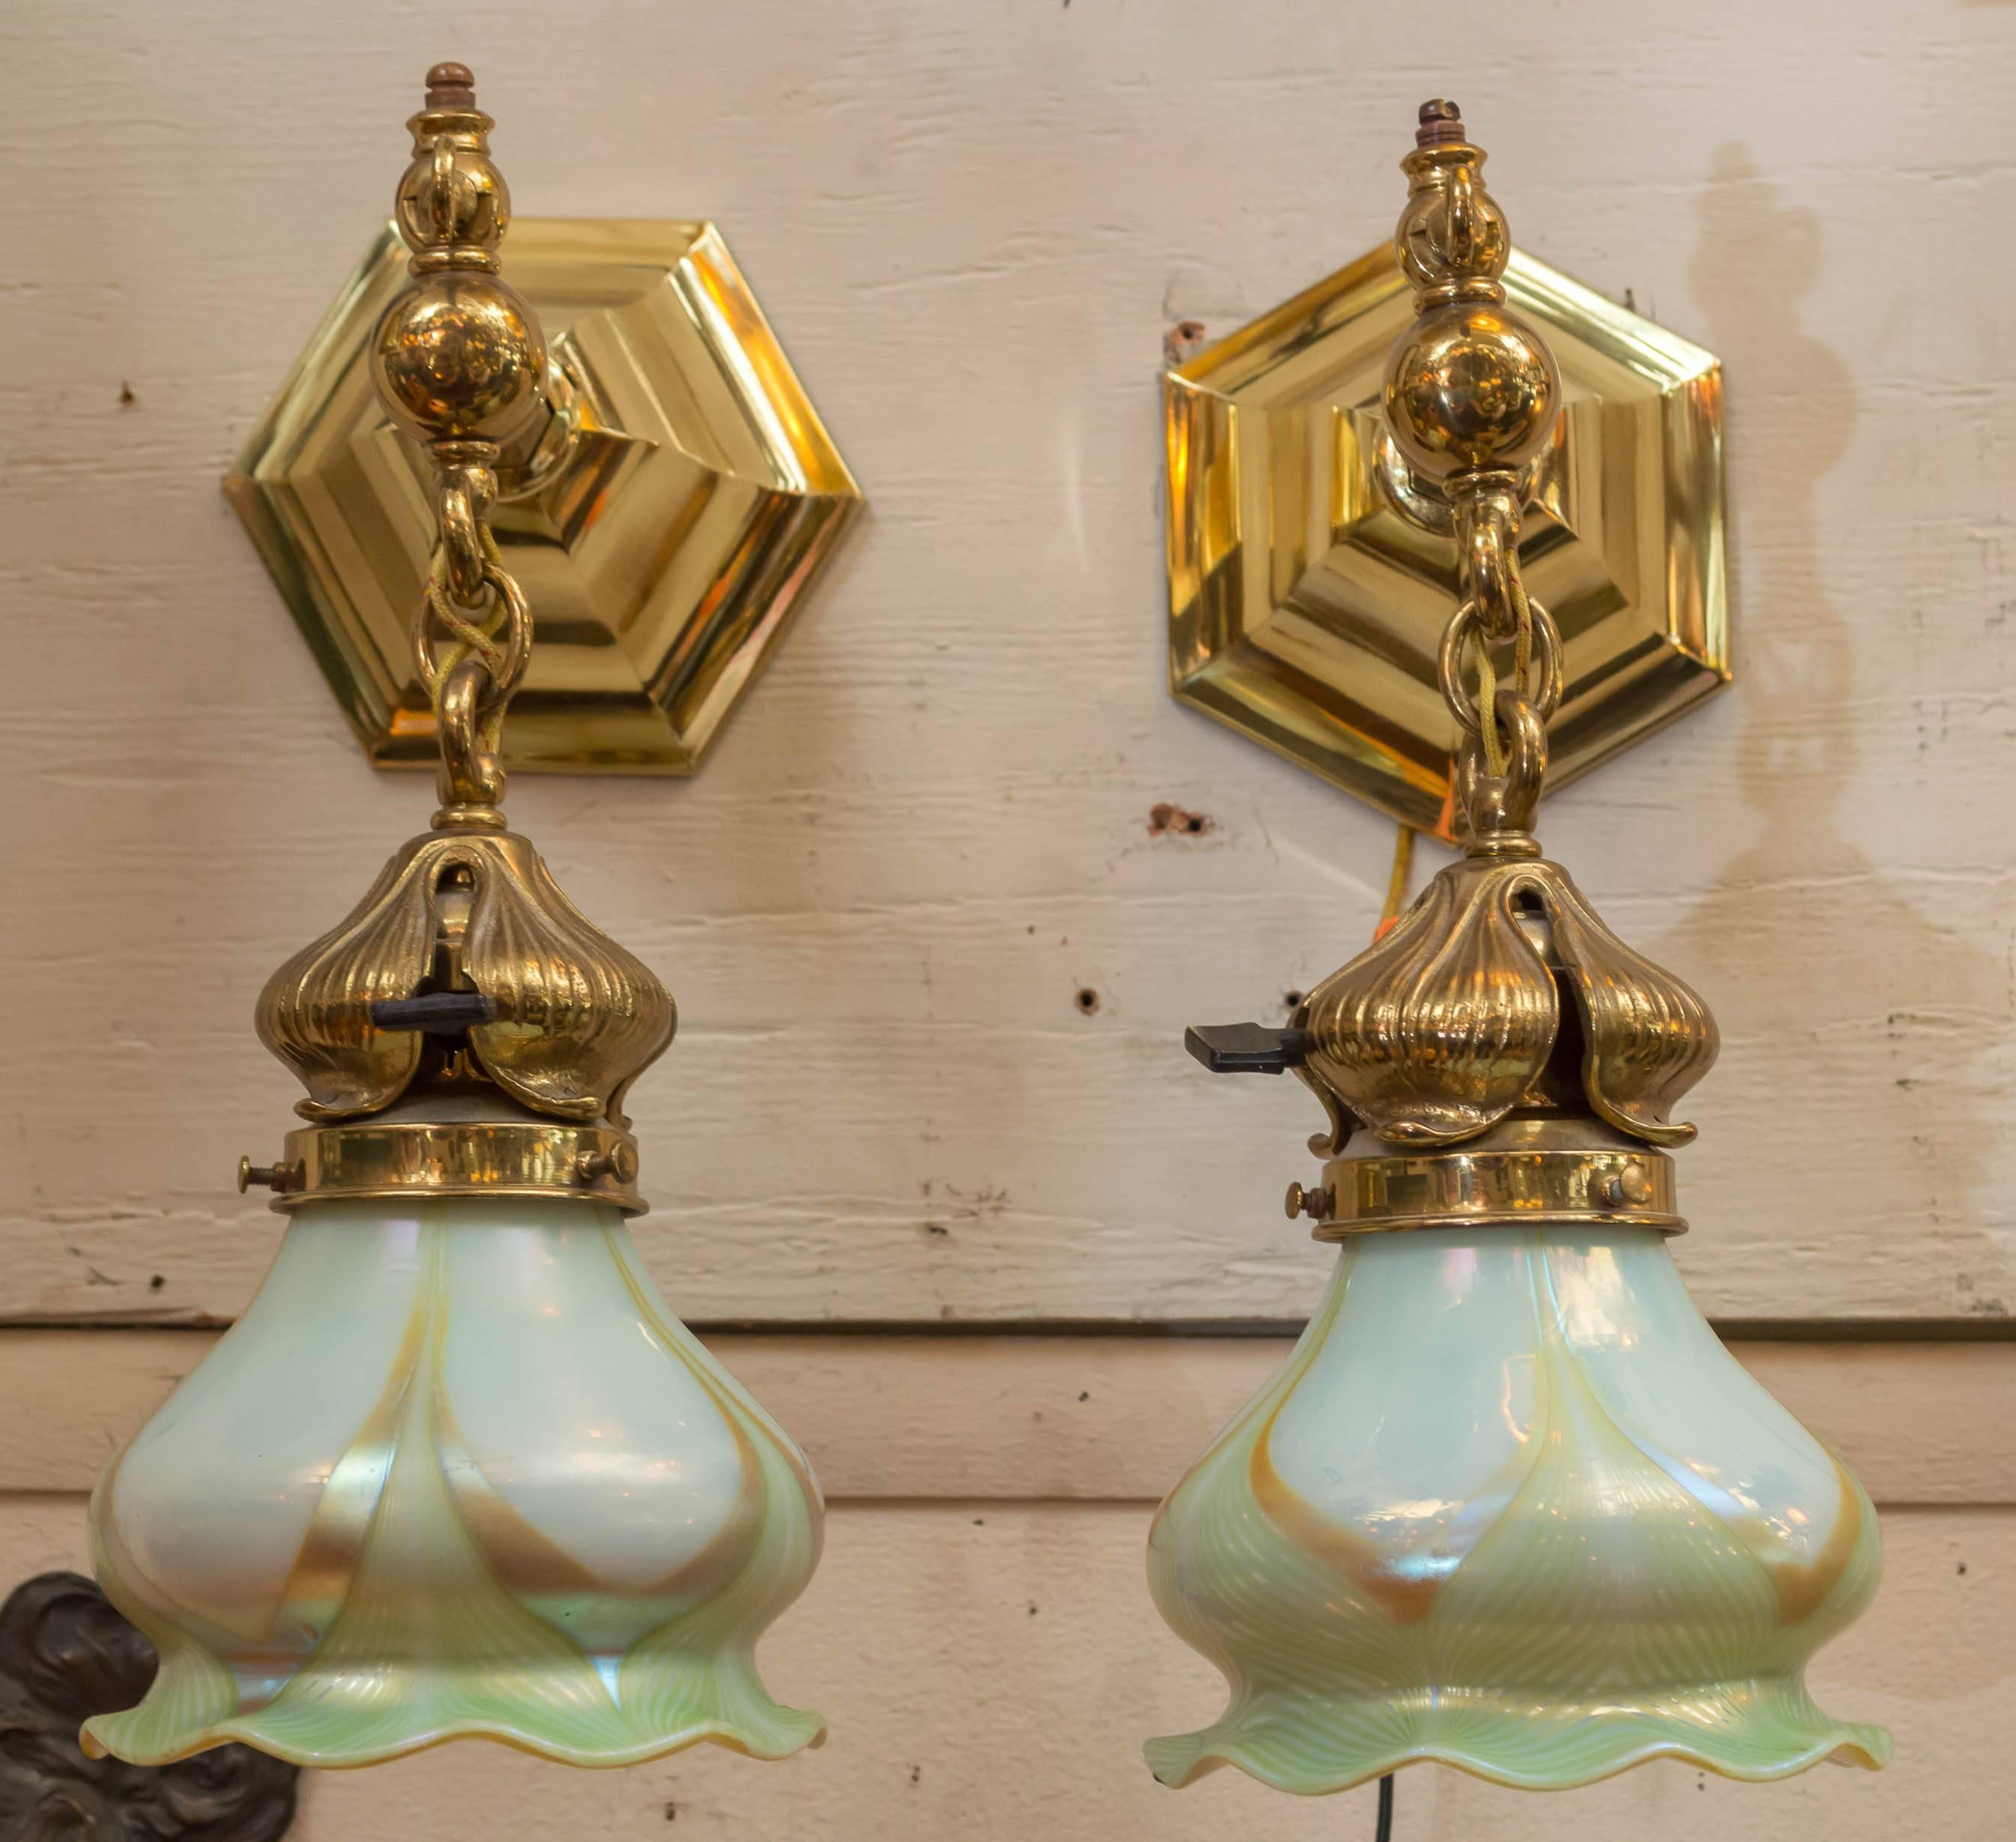 Hand-Crafted Pair of Art Nouveau Sconces with Pulled Feather Art Glass Shades